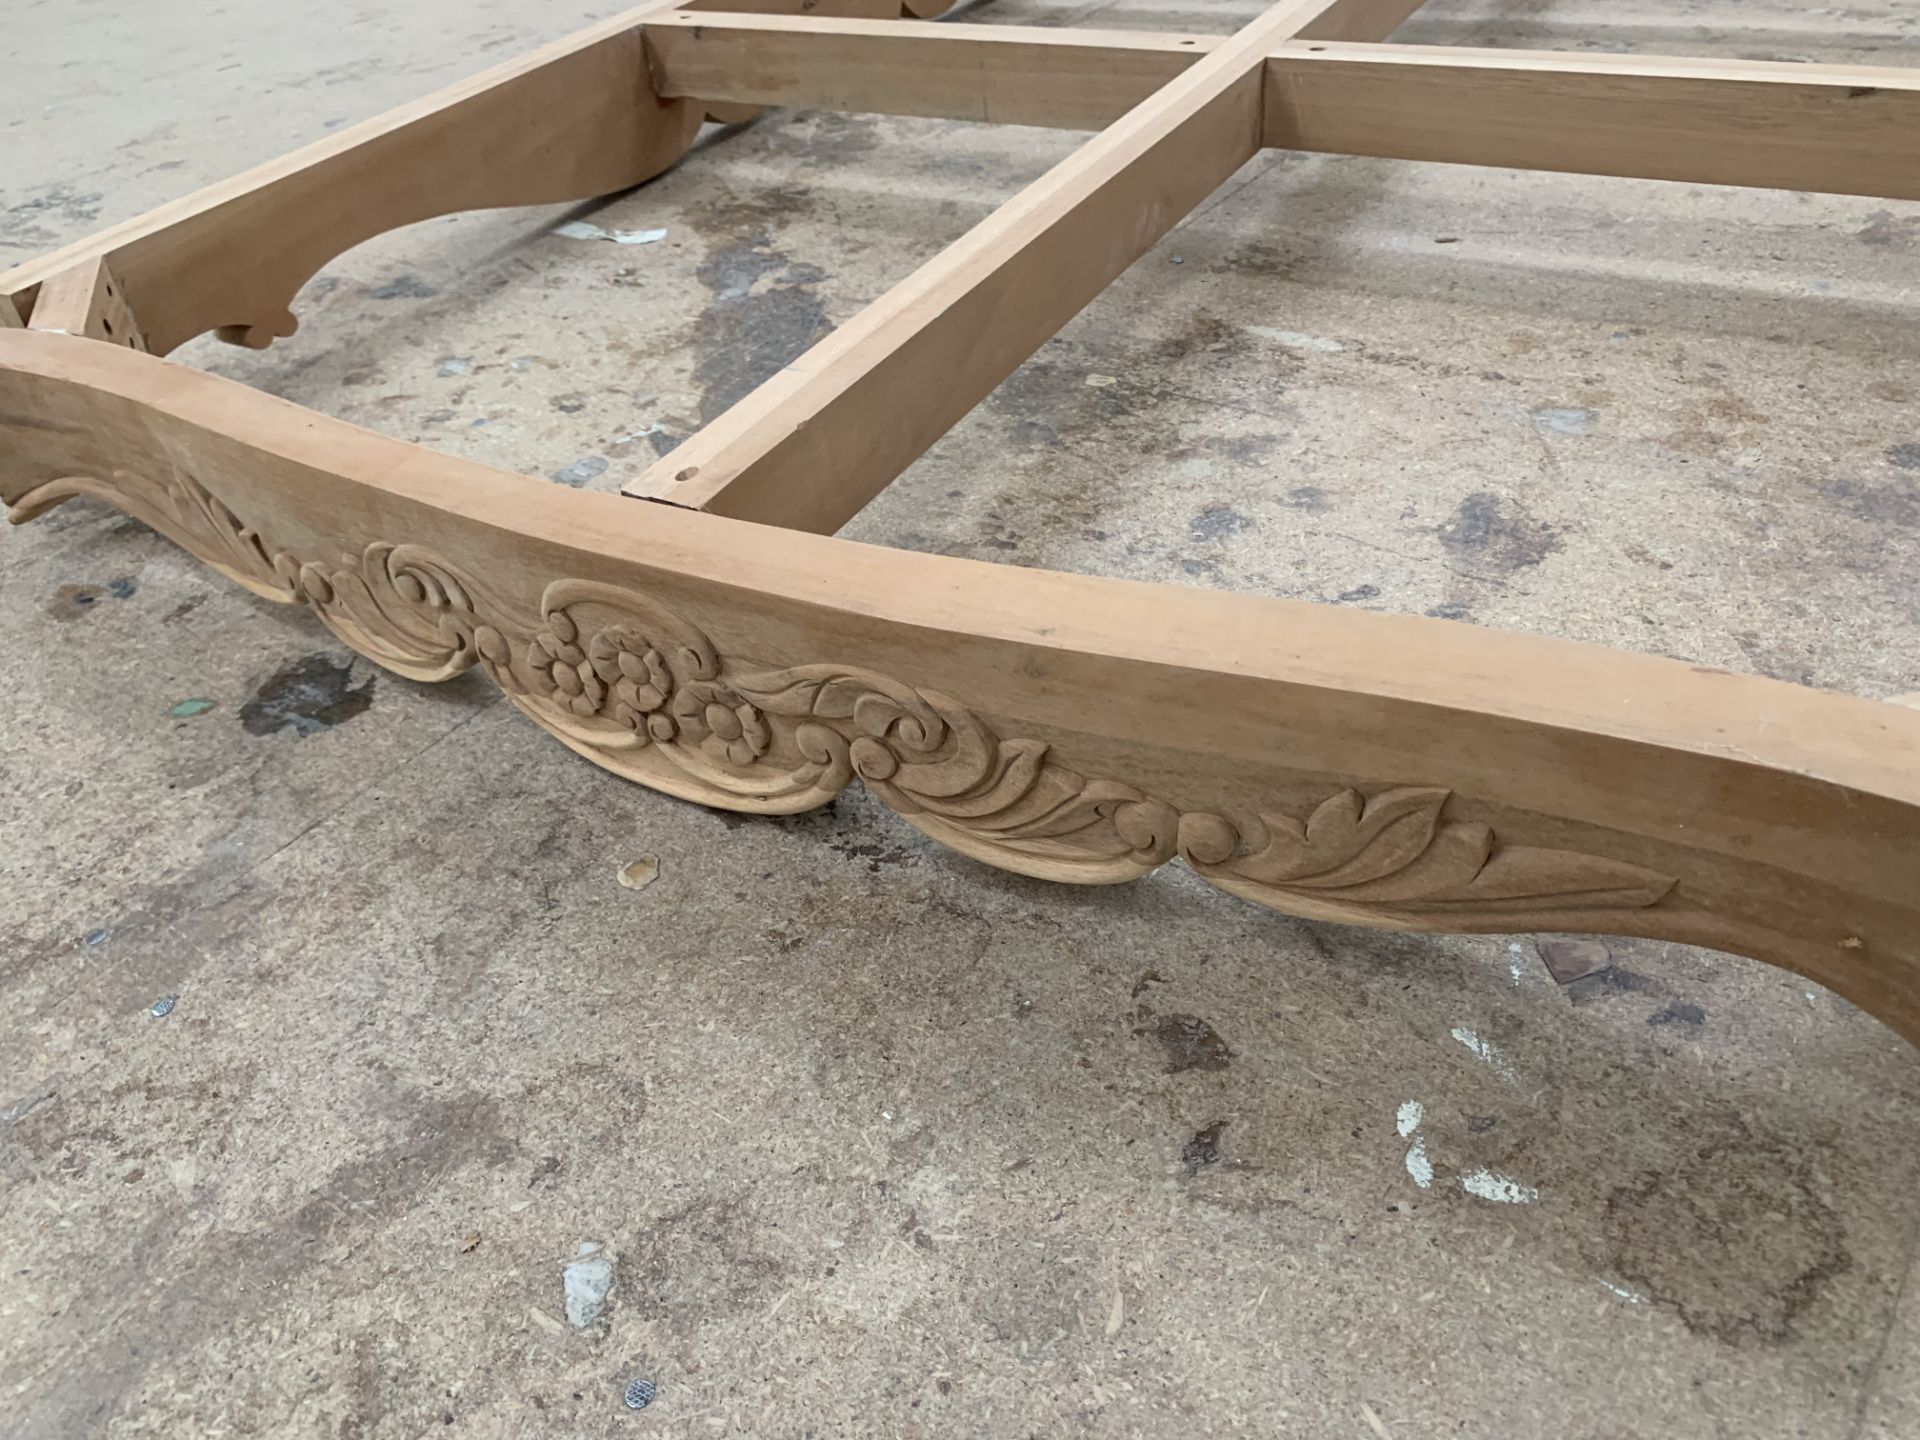 Large decorative carved Coffee Table Frame and Legs, approx 6' x 4', requires finishing/polishing ( - Image 2 of 8